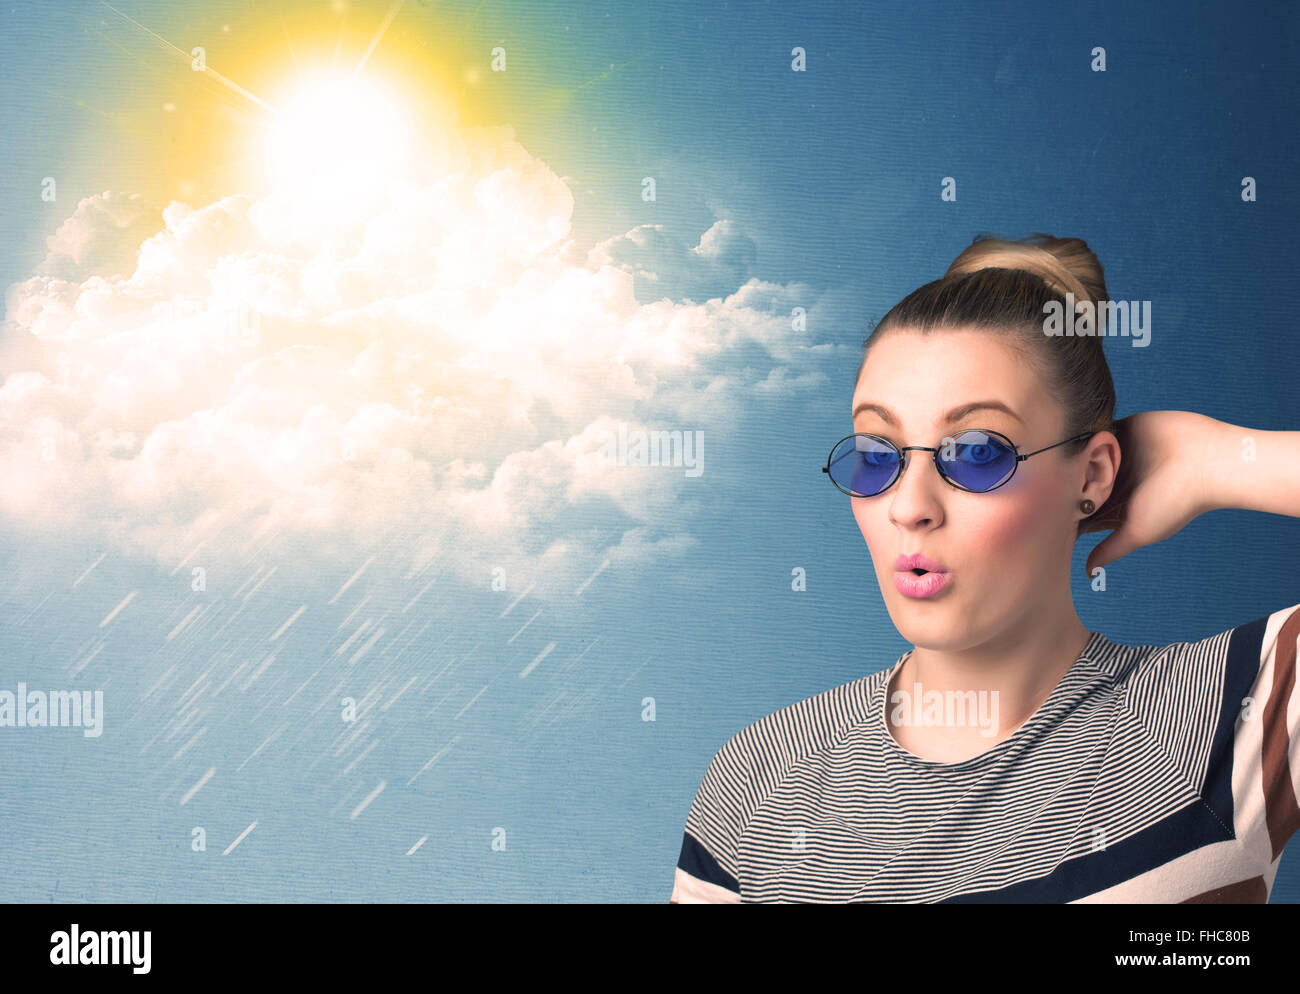 Young person looking with sunglasses at clouds and sun Stock Photo